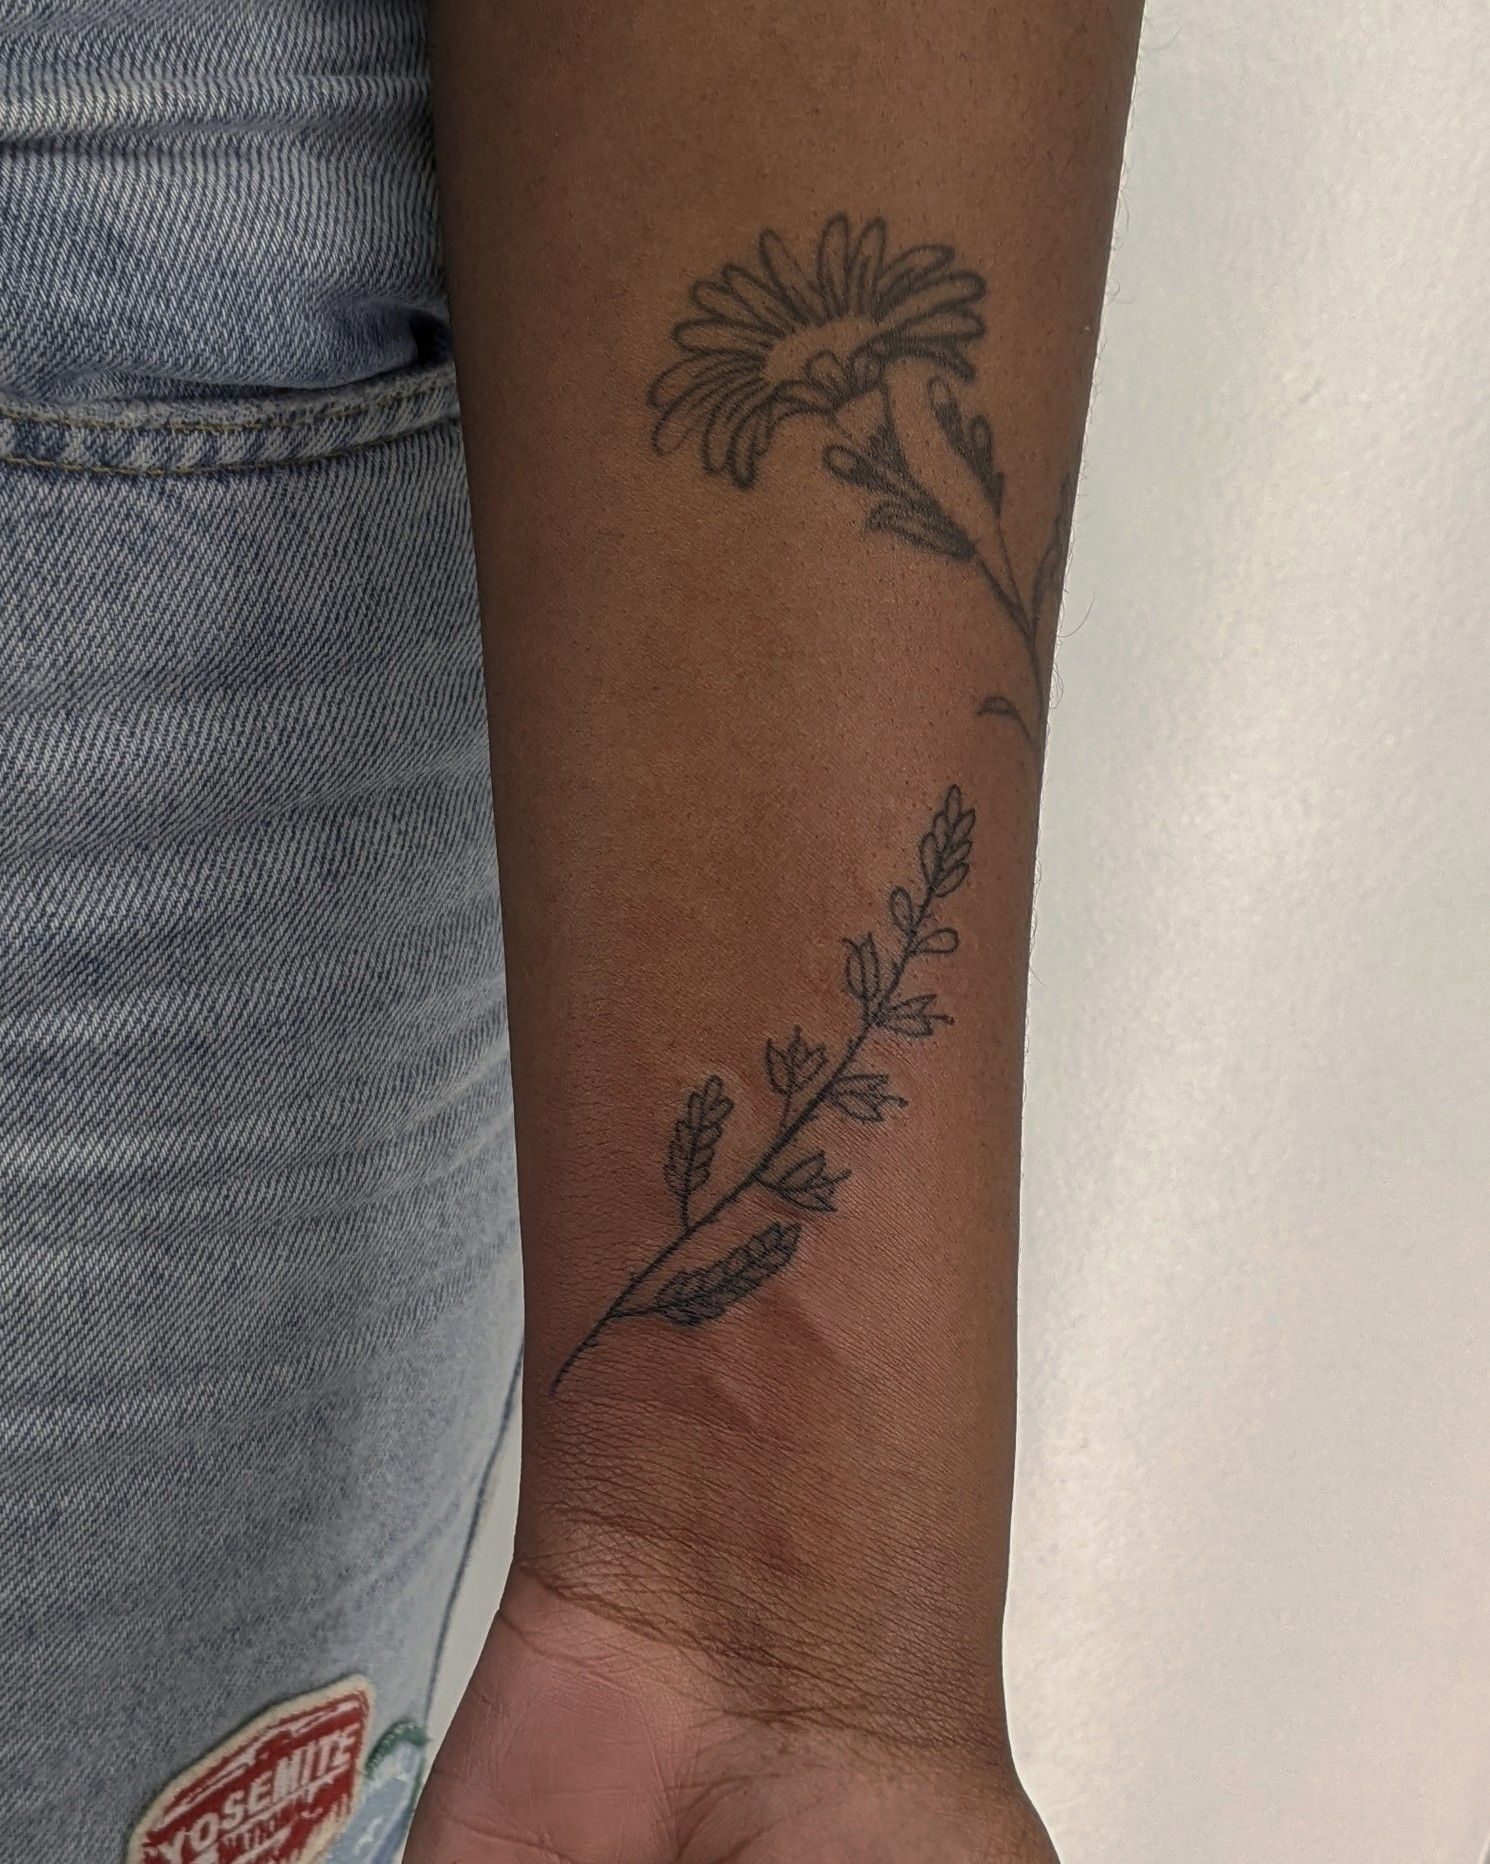 Looking to get the little arrow design covered. My tattoo artist doesn't  thing he can without later removal but I'm a bit wary about that. Anything  floral or nature based to go